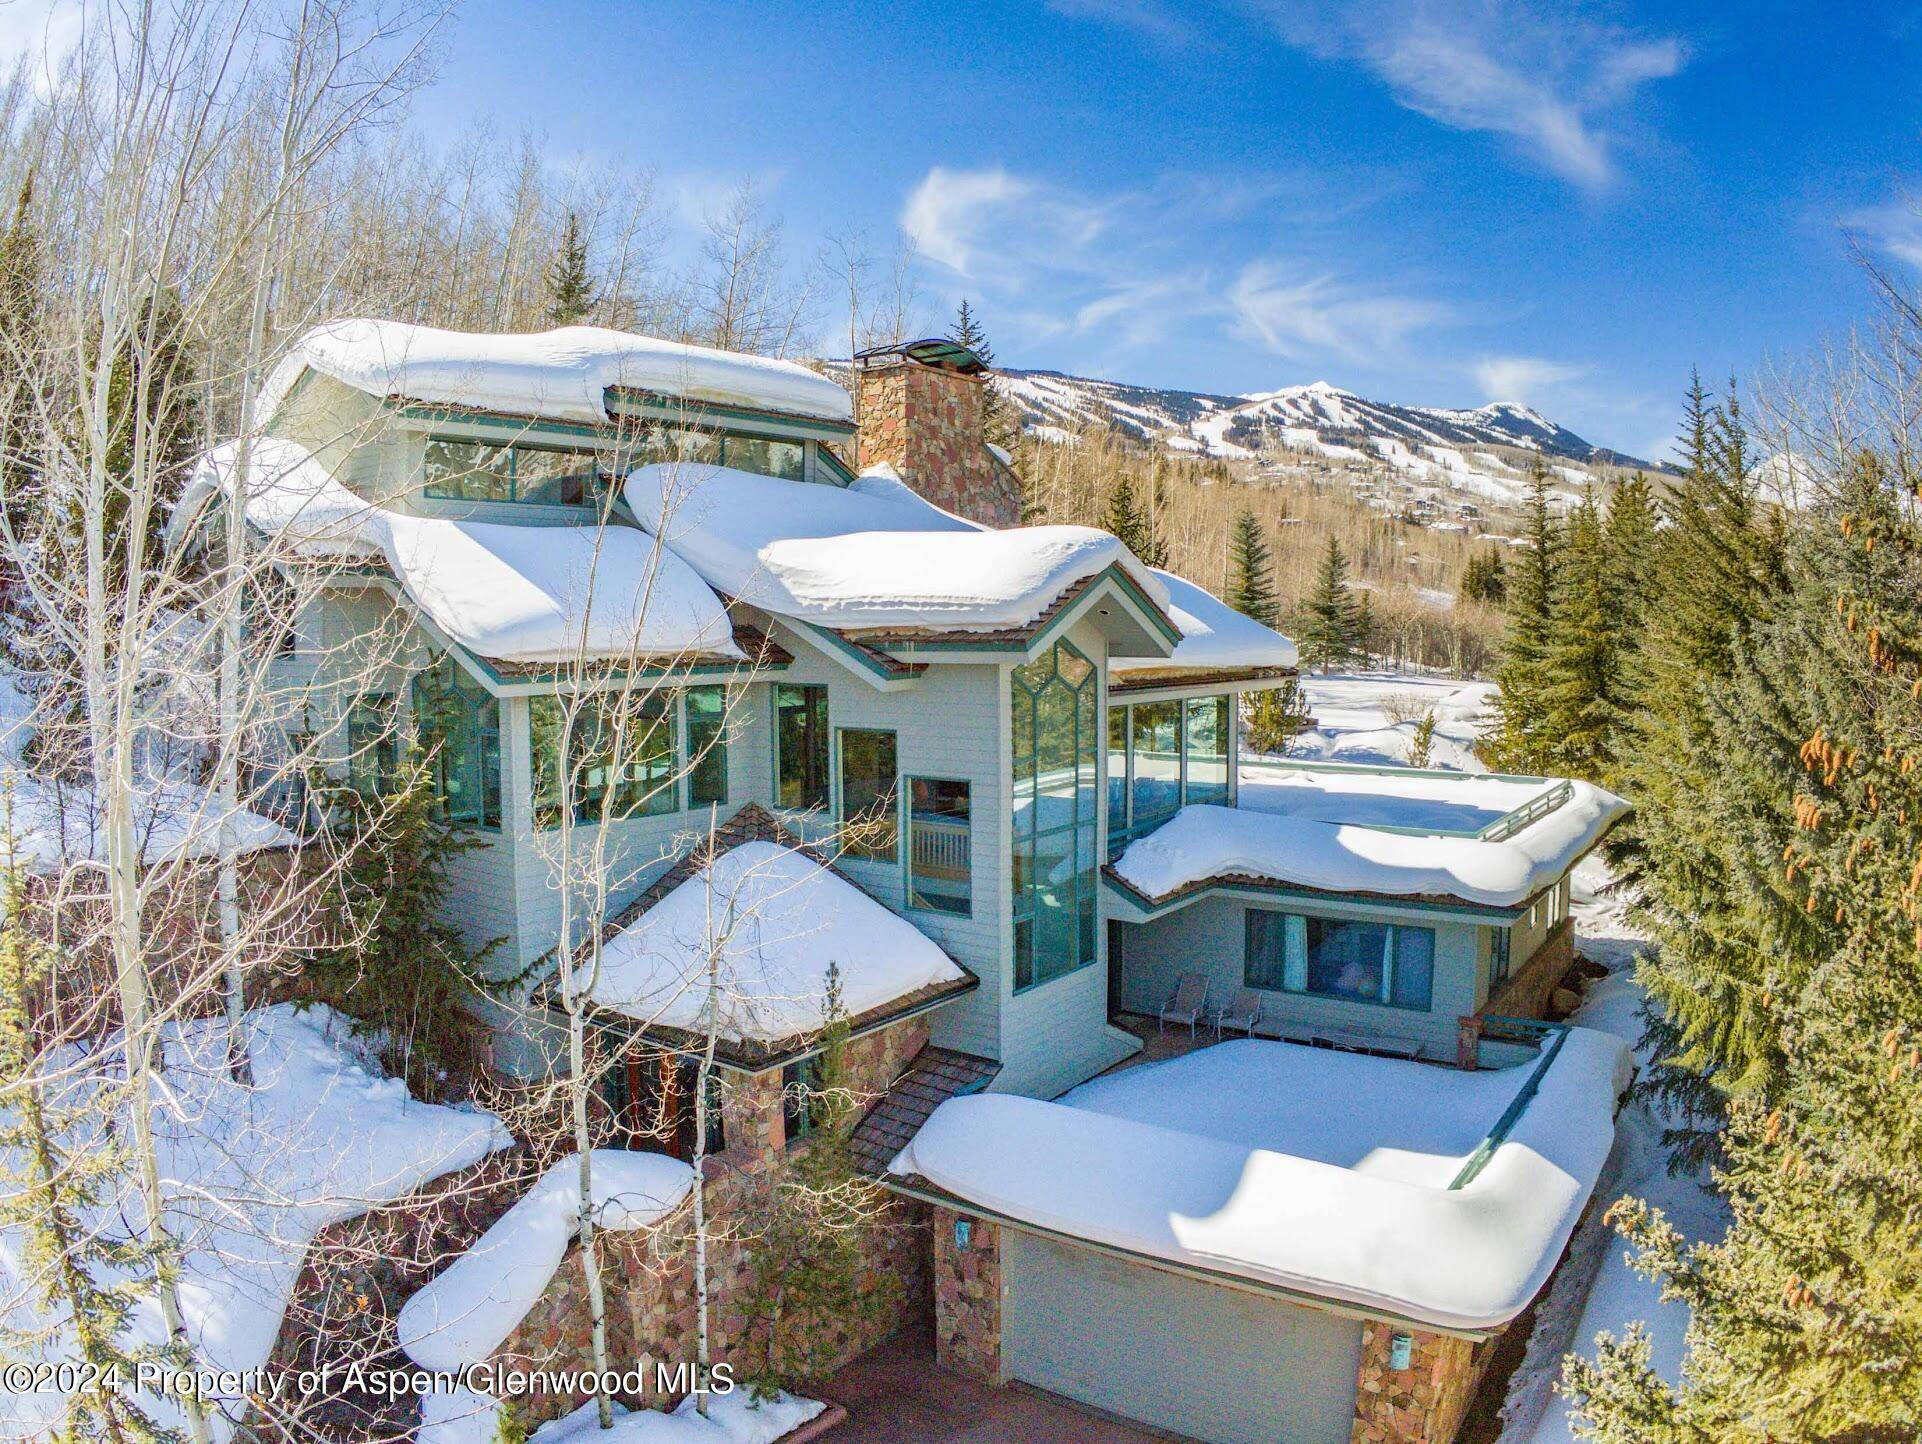 A very rare opportunity to develop a family compound in Snowmass Village, this type of property does not come around very often, if at all !